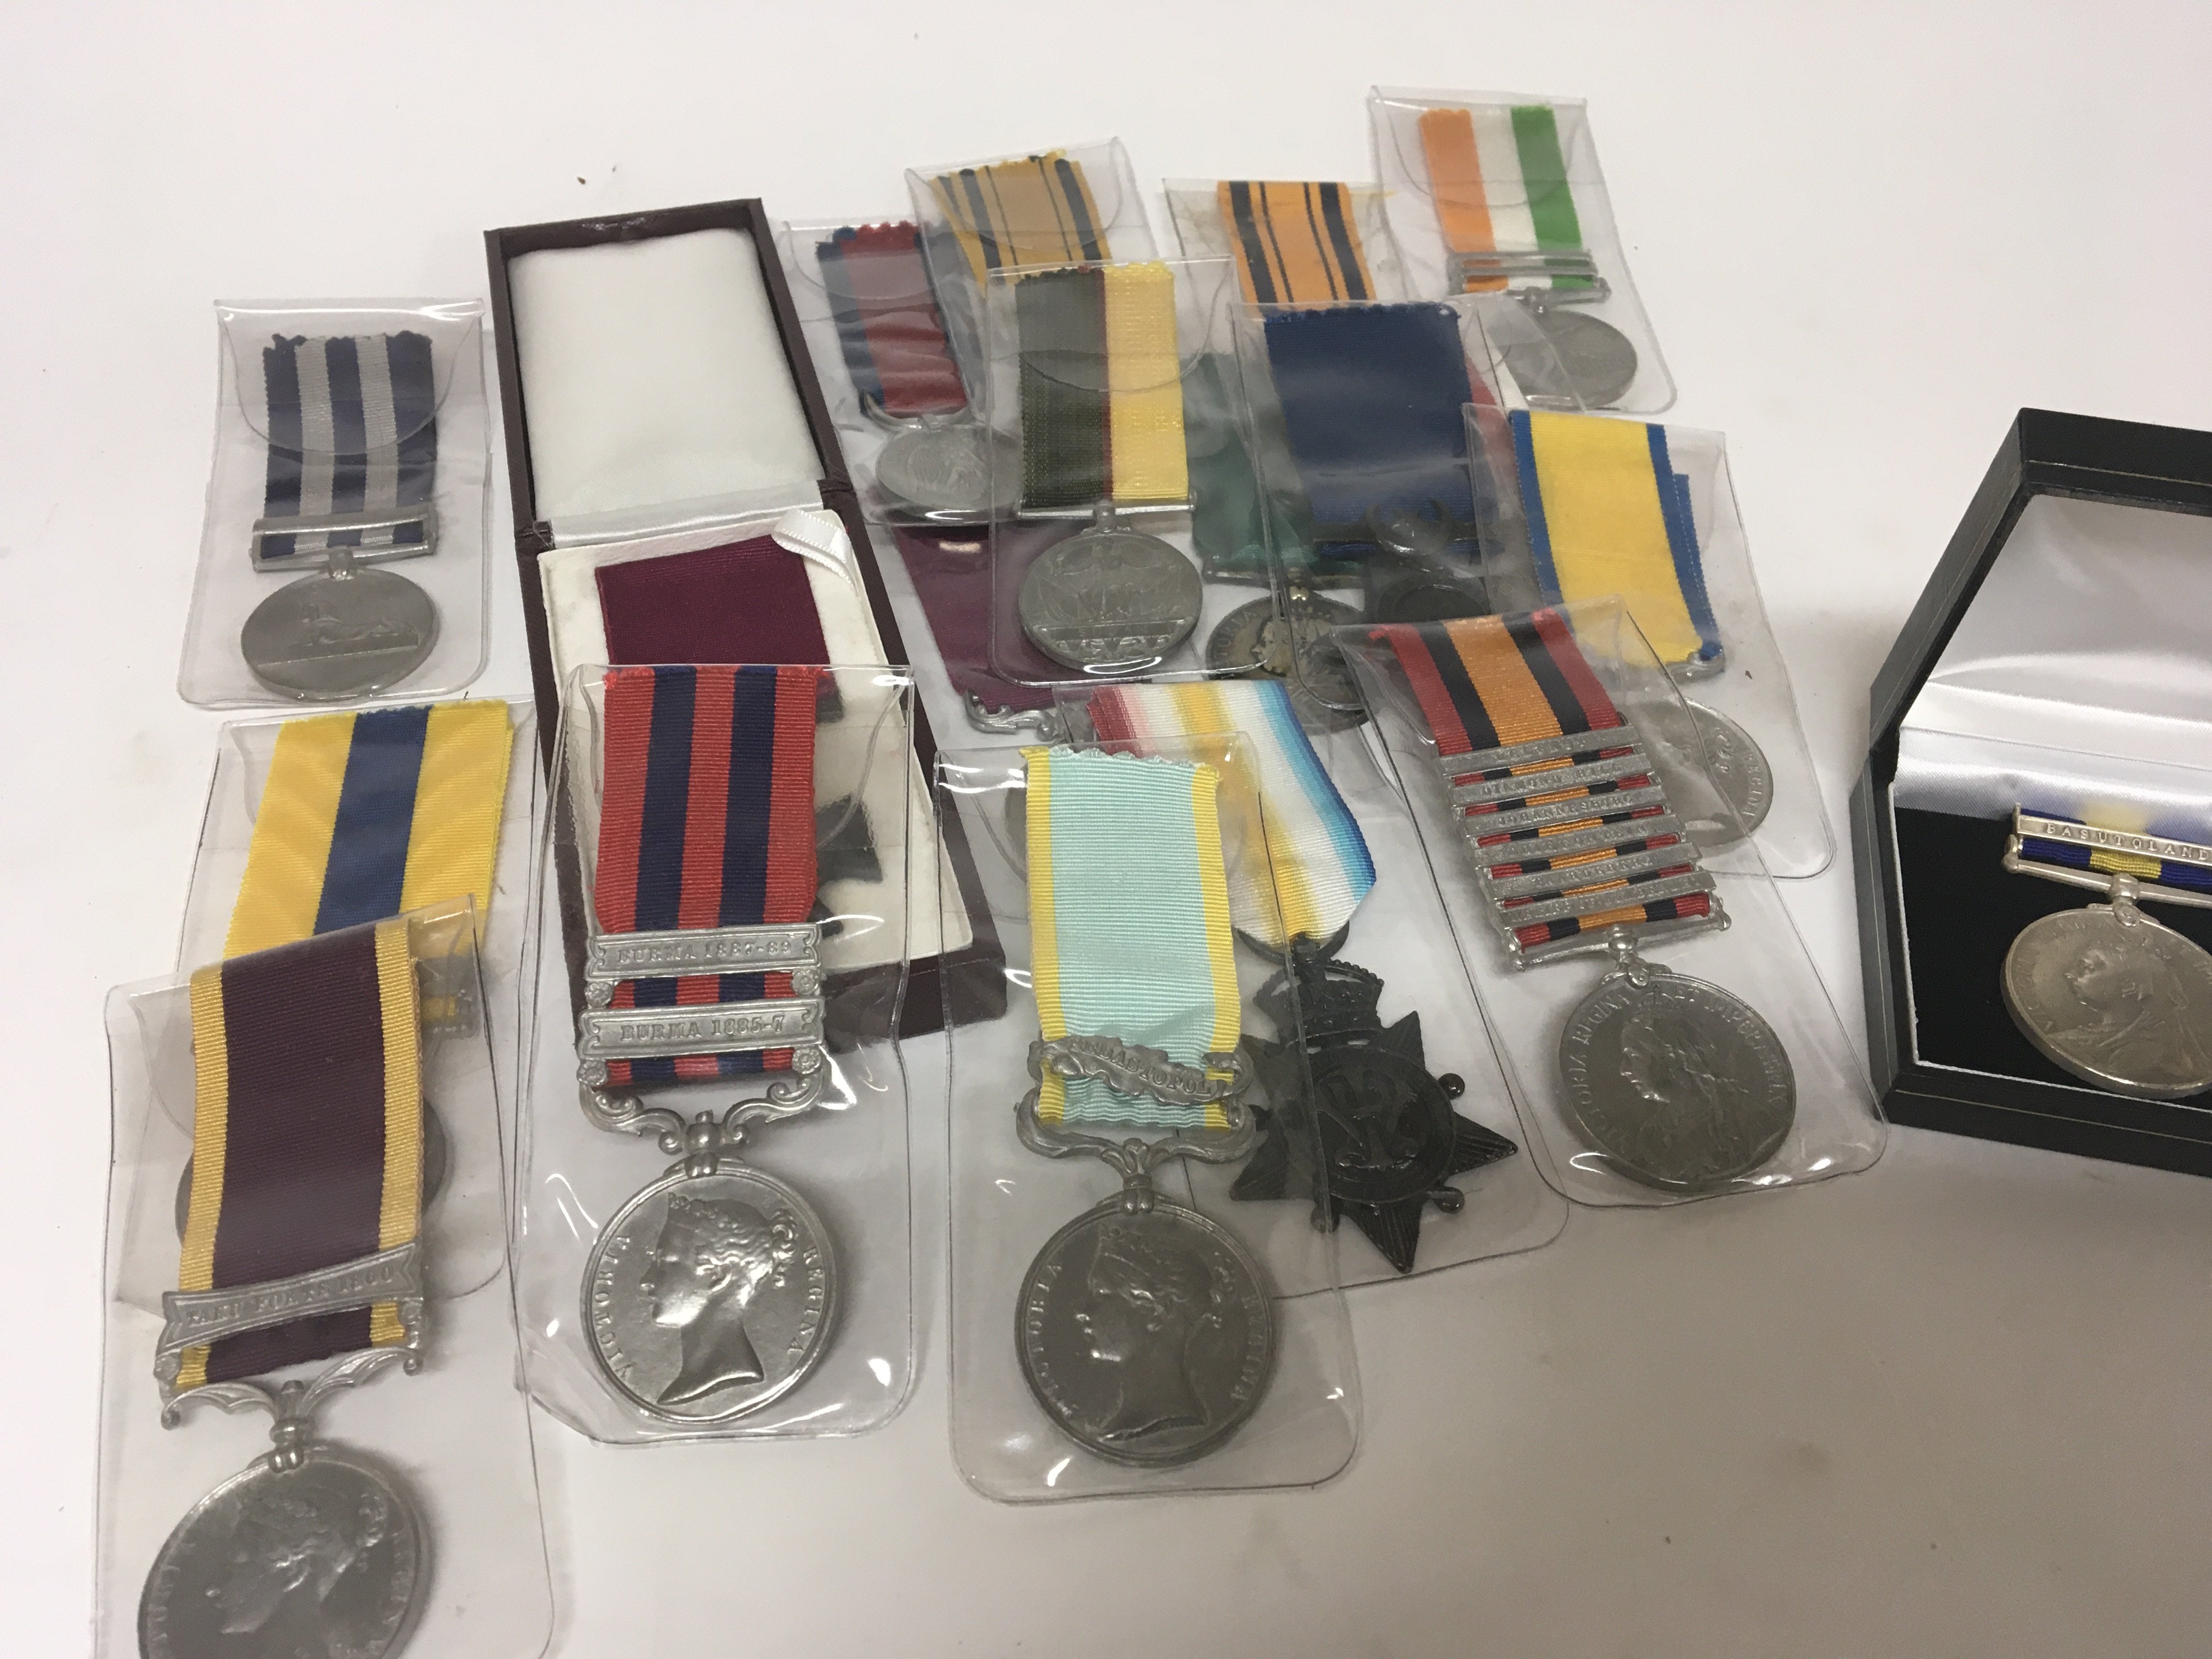 A collection of retrospective copy medals including The Battle of Waterloo medal